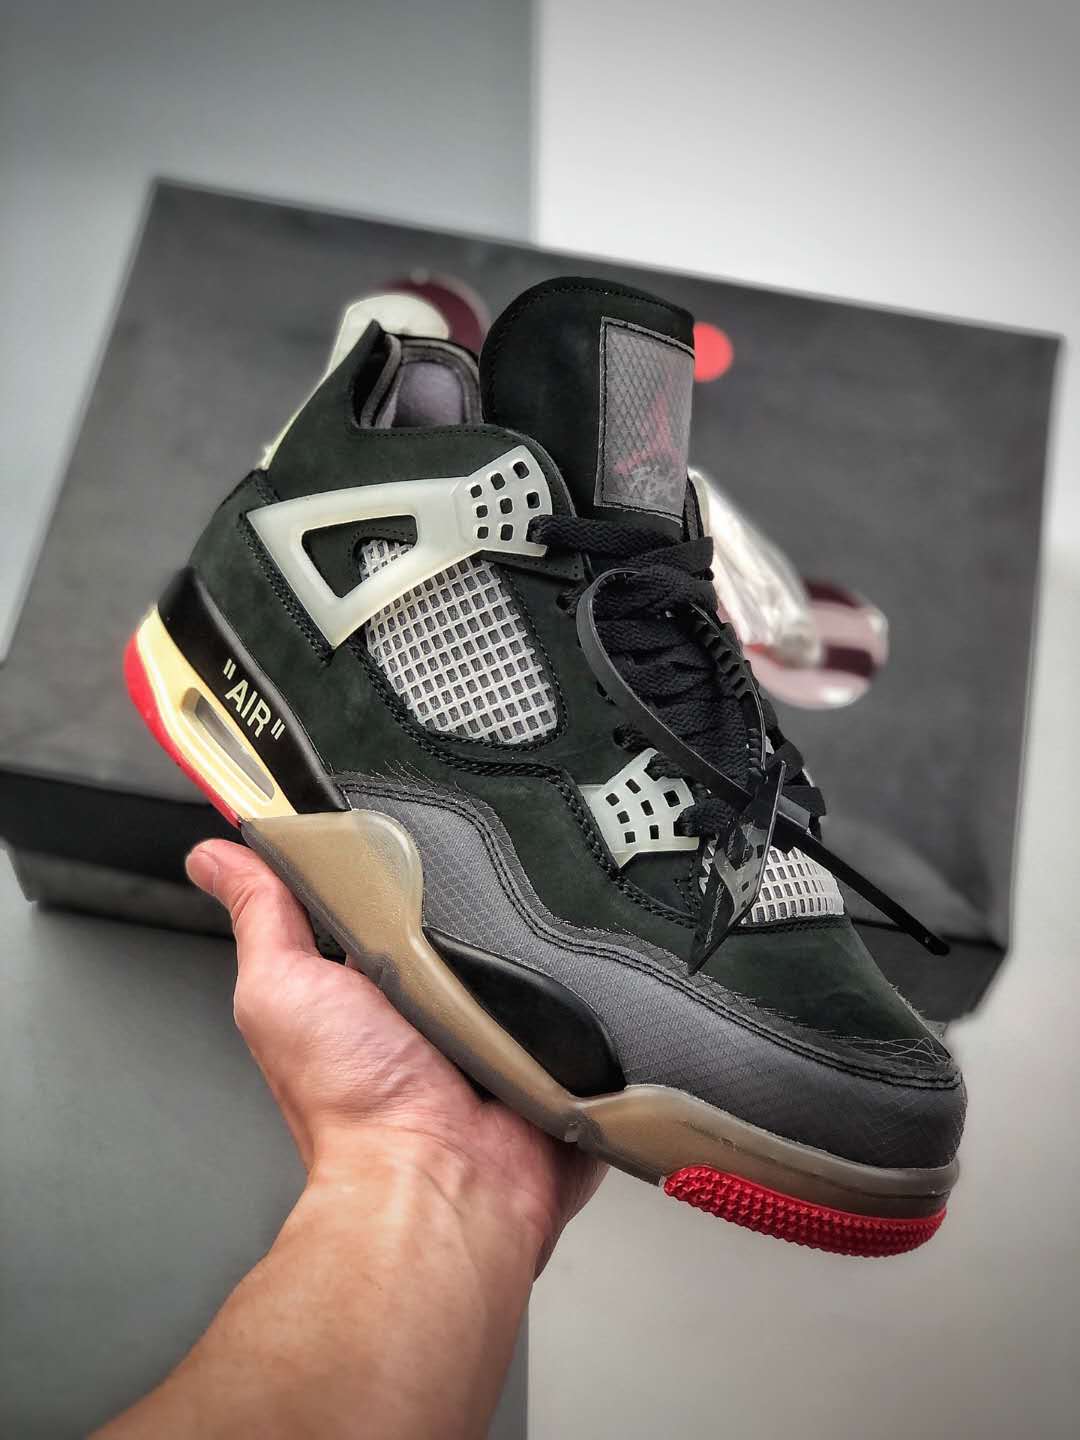 Off-White x Air Jordan 4 Retro Black CV9388-001: Iconic Collaboration | Limited Edition Sneakers